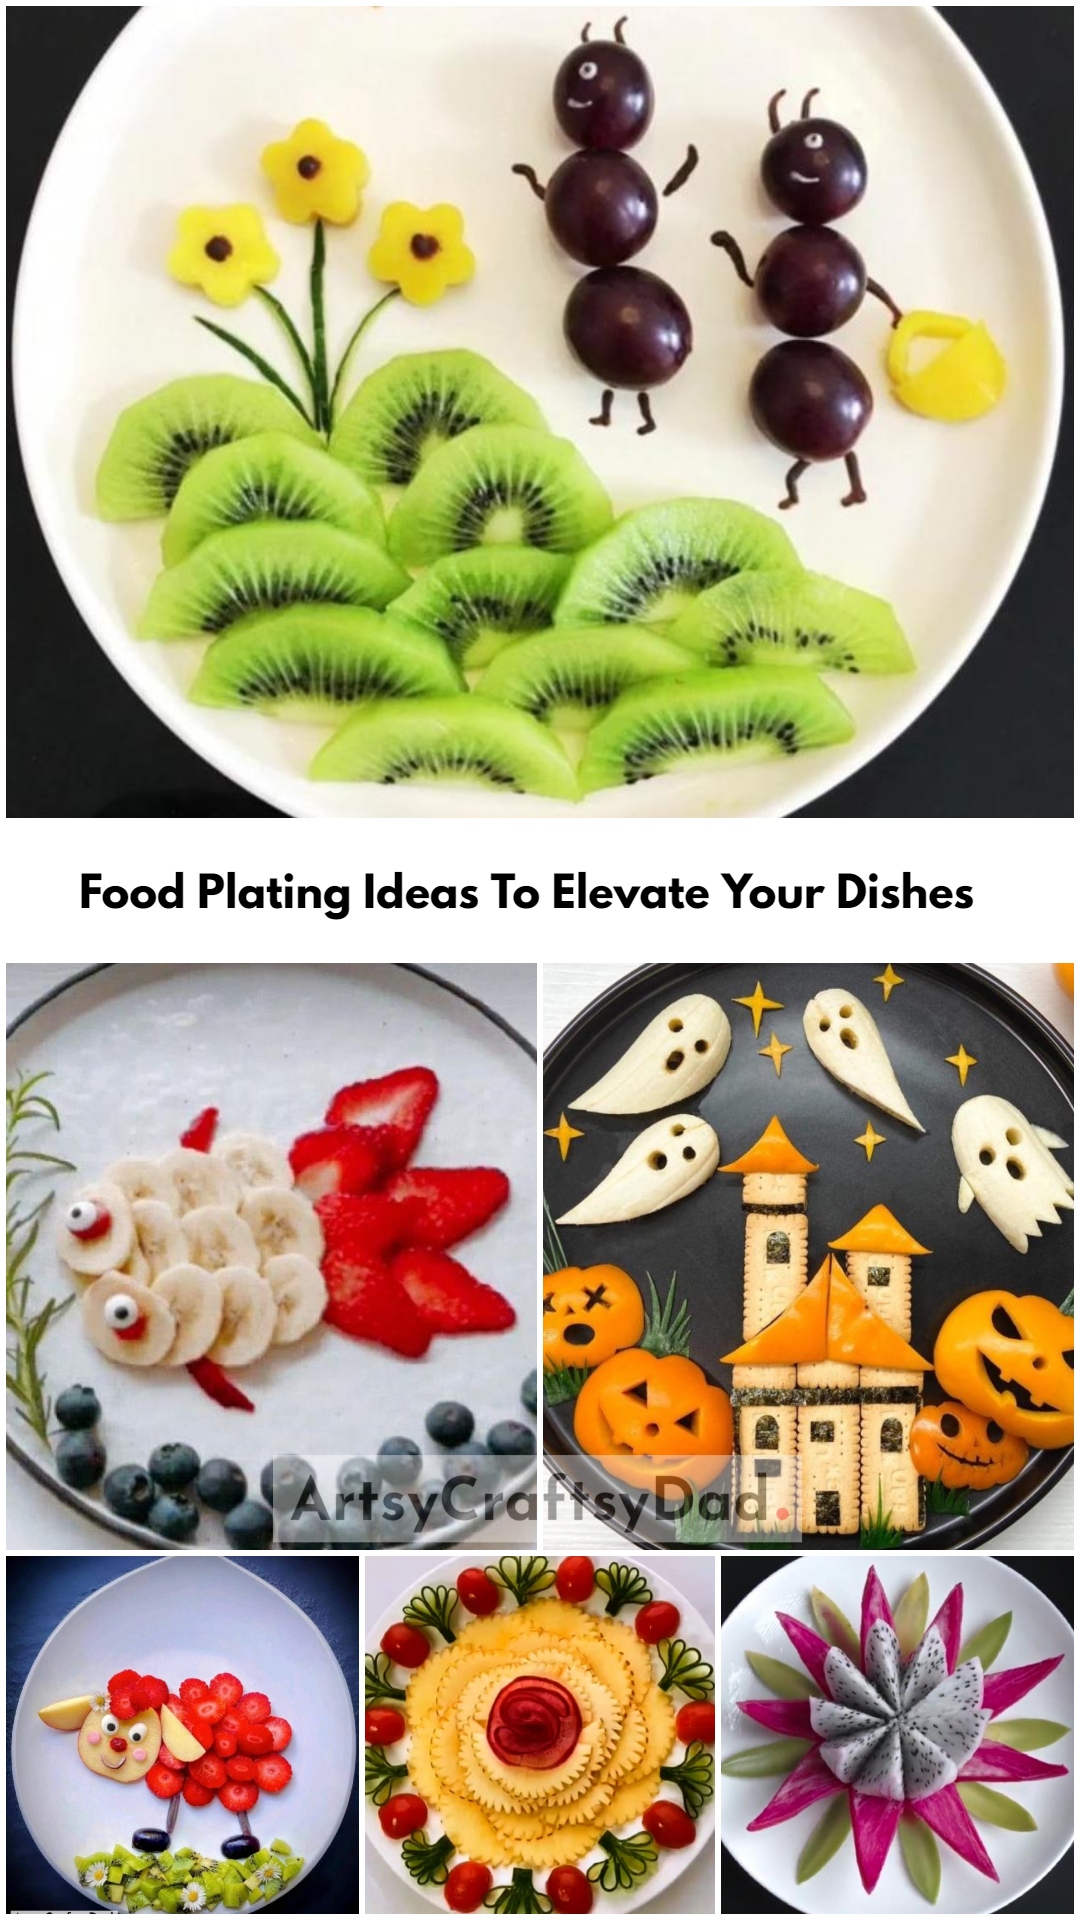 Amazing Food Plating Ideas to Elevate Your Dishes